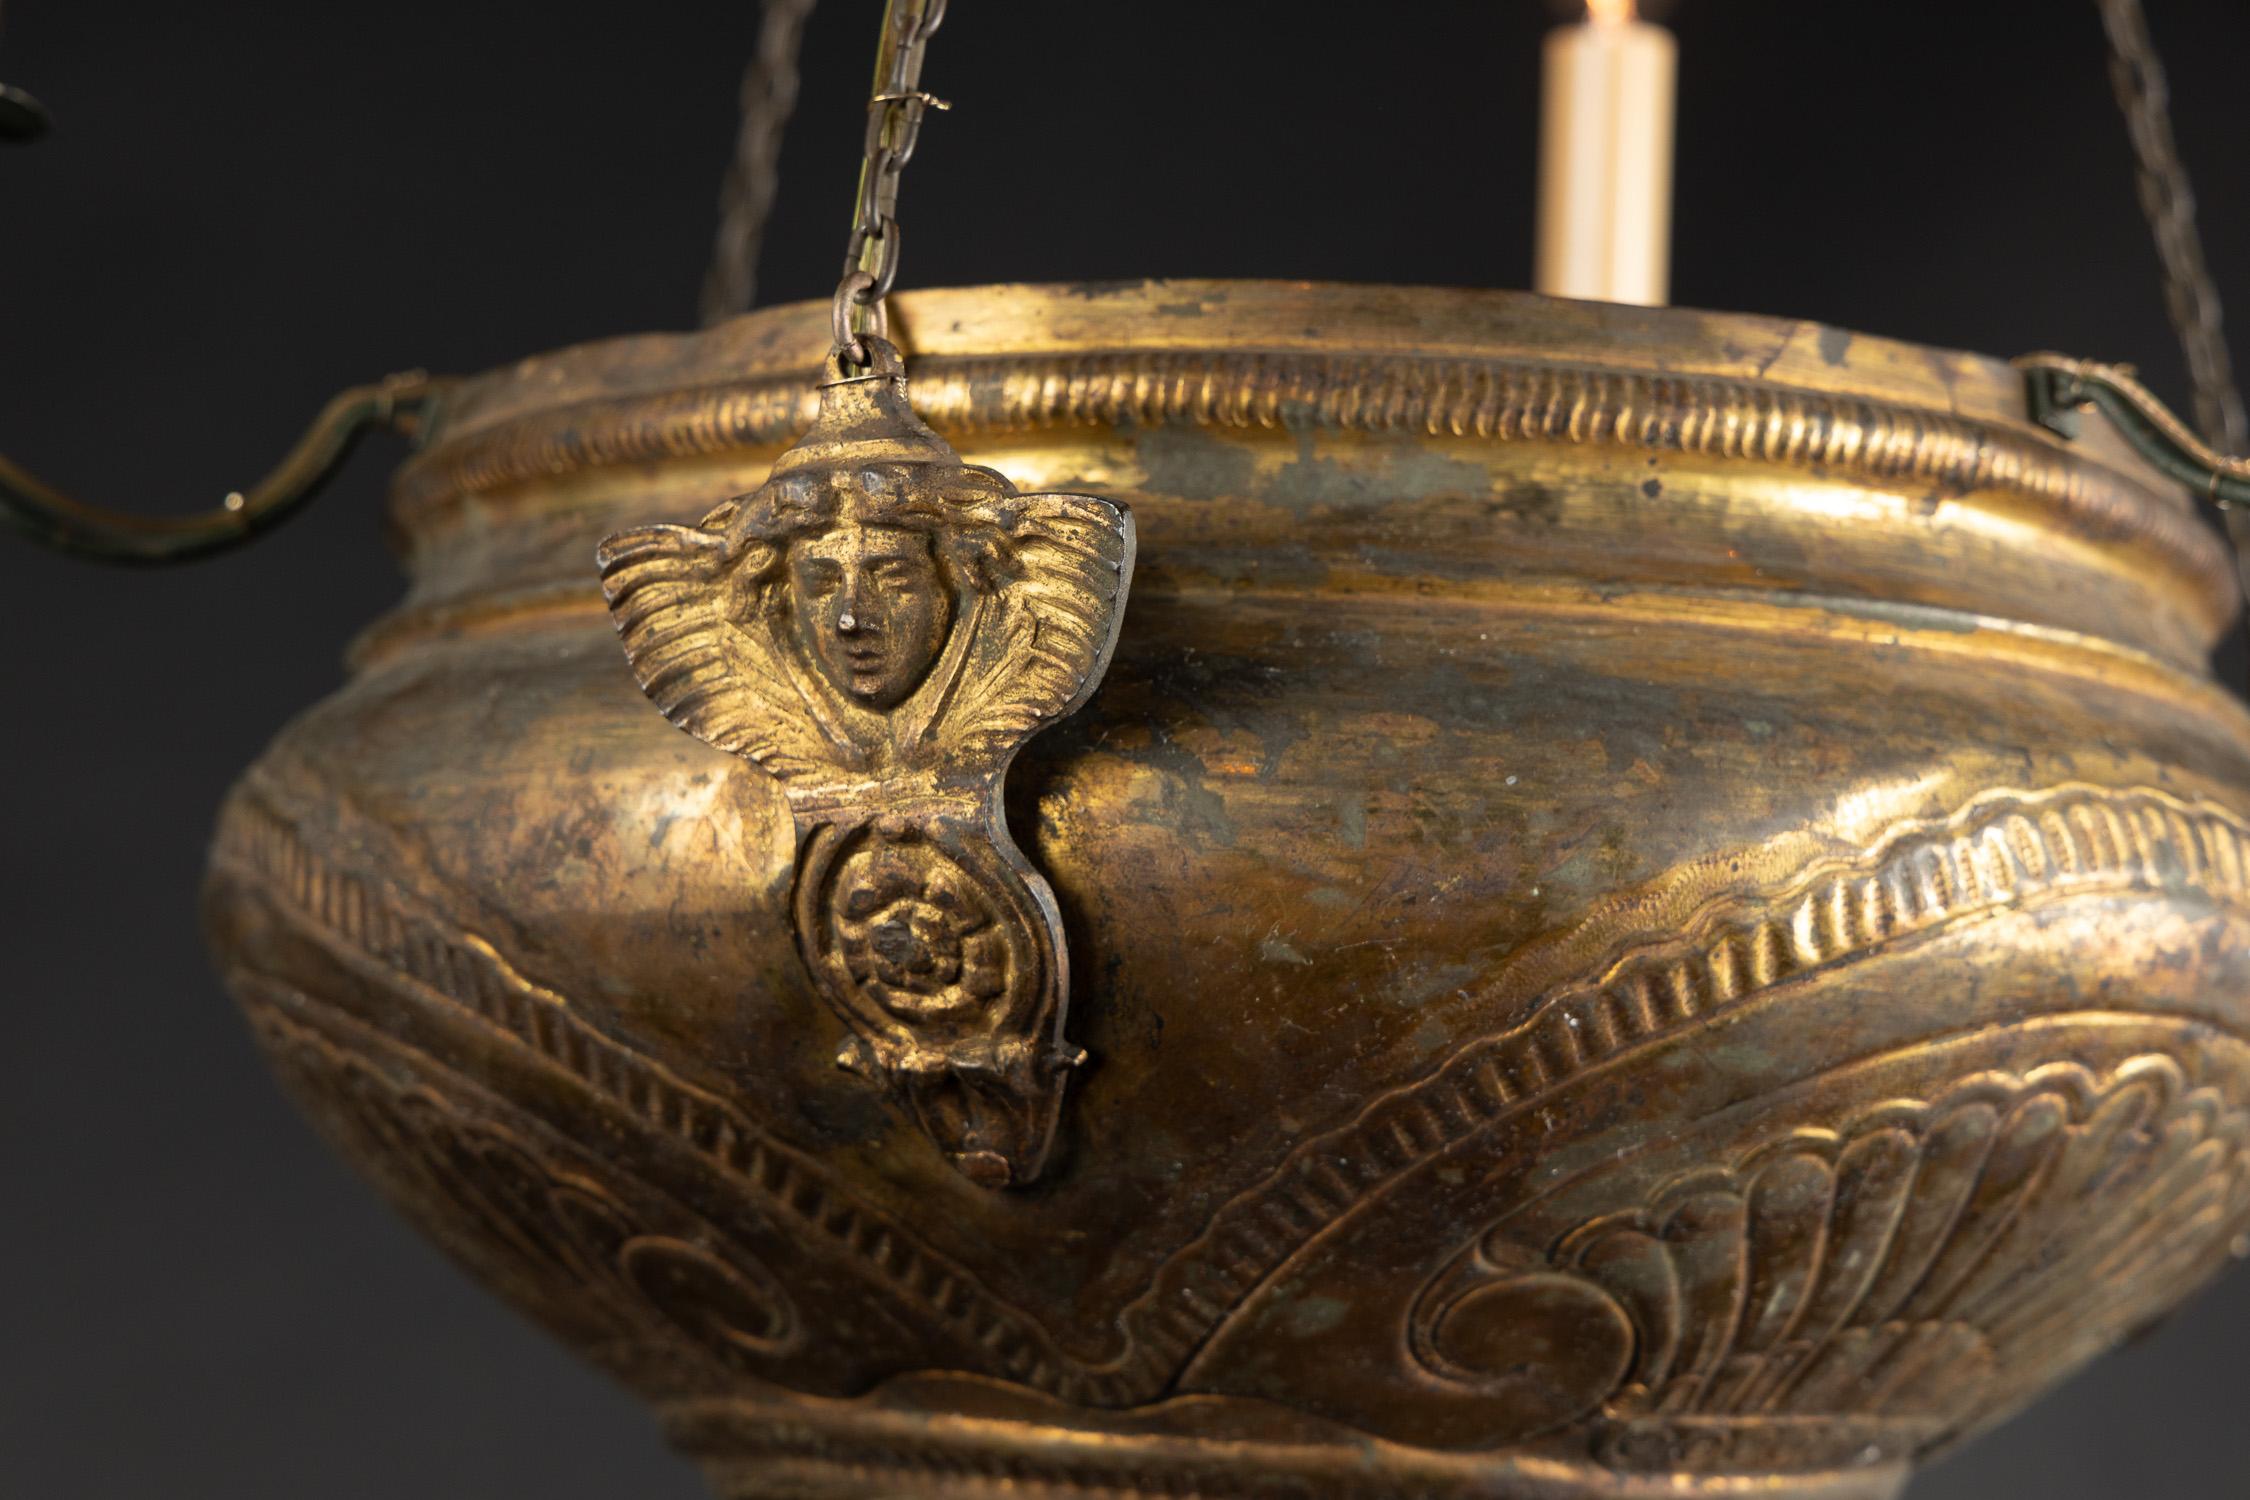 This unique hanging lantern was once an incense burning sanctuary lamp, and is made of brass sporting a beautiful patina. The French antique piece dates back to the 19th century and is embellished with hand-chiseled Moorish designs on the large